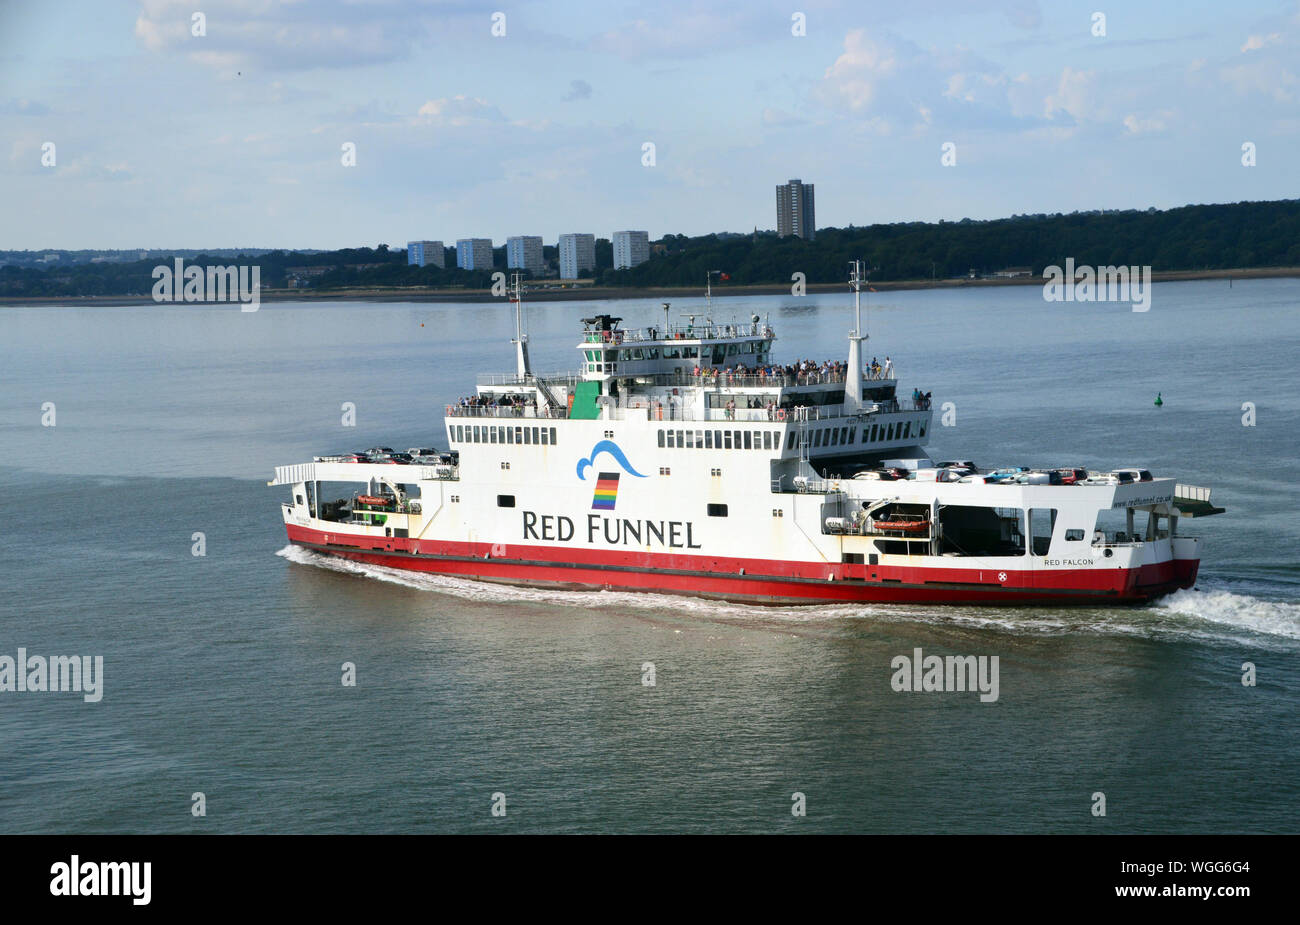 The Red Falcon Passenger and Car Ferry owned by the Red Funnel Ferry Company in the Solent heading for Southampton Harbour, Hampshire, England, UK. Stock Photo